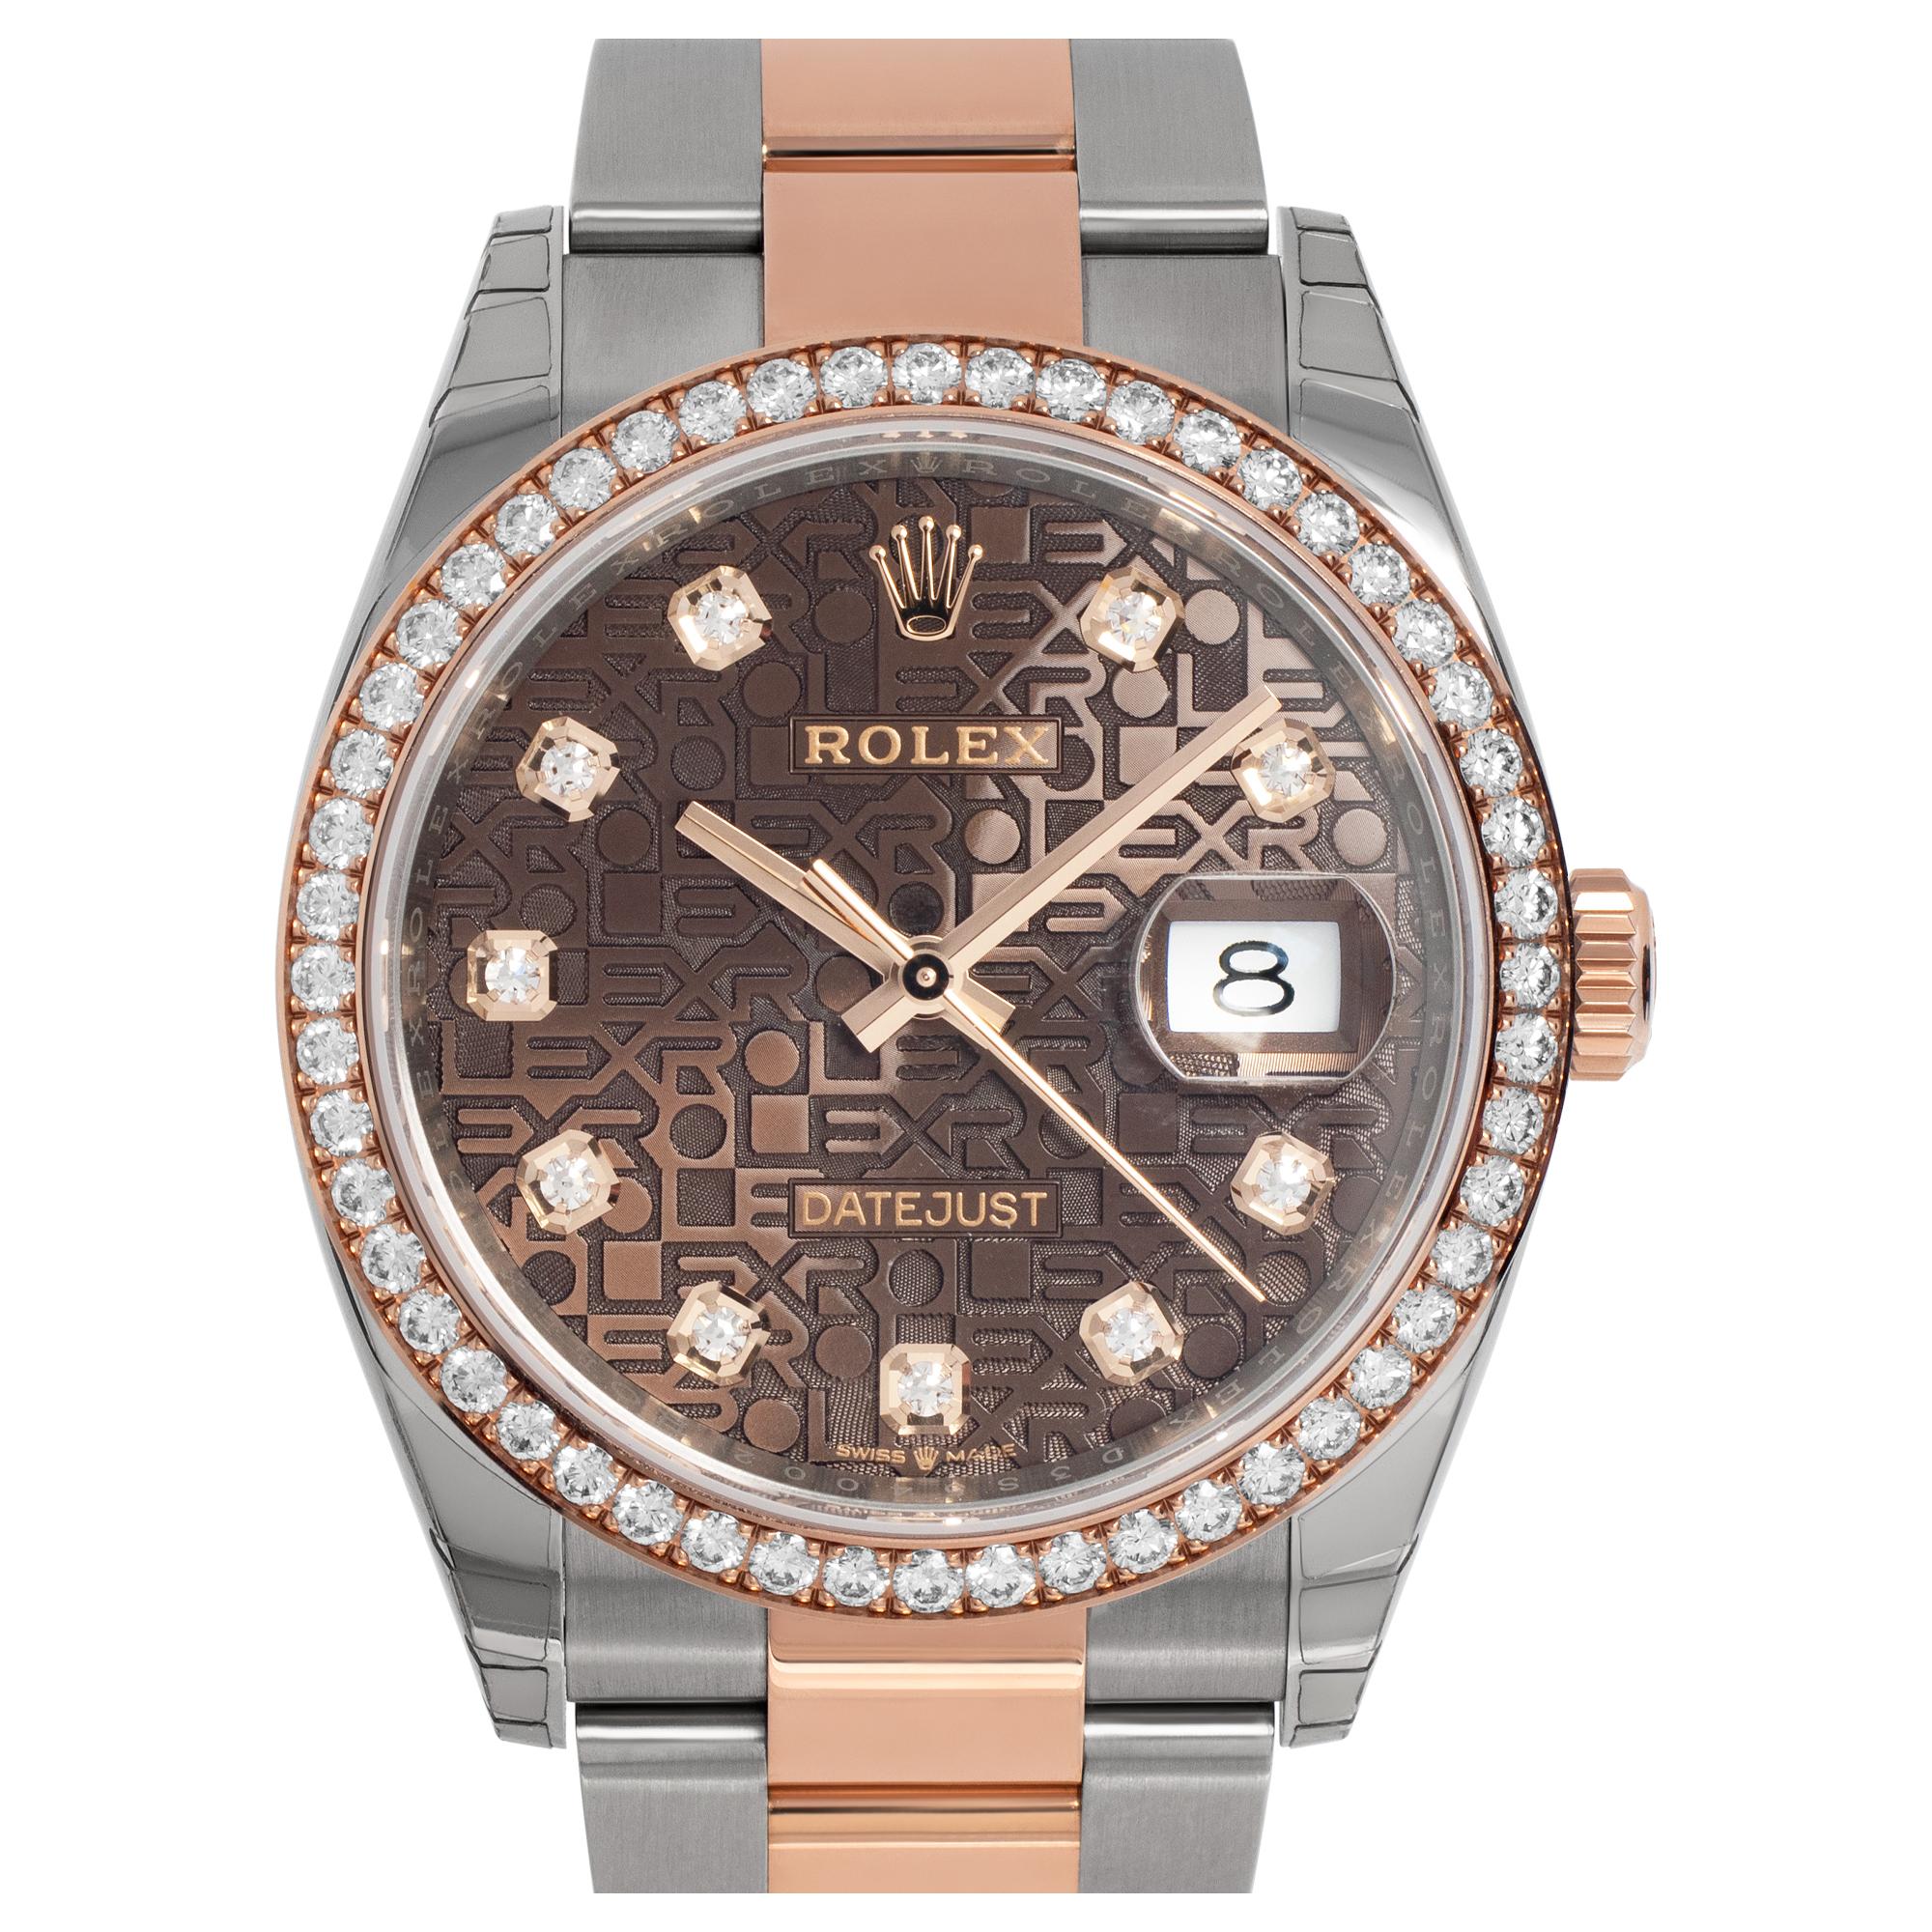 UNUSED & FULY STICKERED! Rolex Datejust in 18k everose & stainless steel with diamond bezel & chocolate Anniversary Jubilee diamond dial. Auto w/ sweep seconds and date. 36 mm case size. Unused with box and papers. Ref 126281RBR. Circa 2022. **Bank